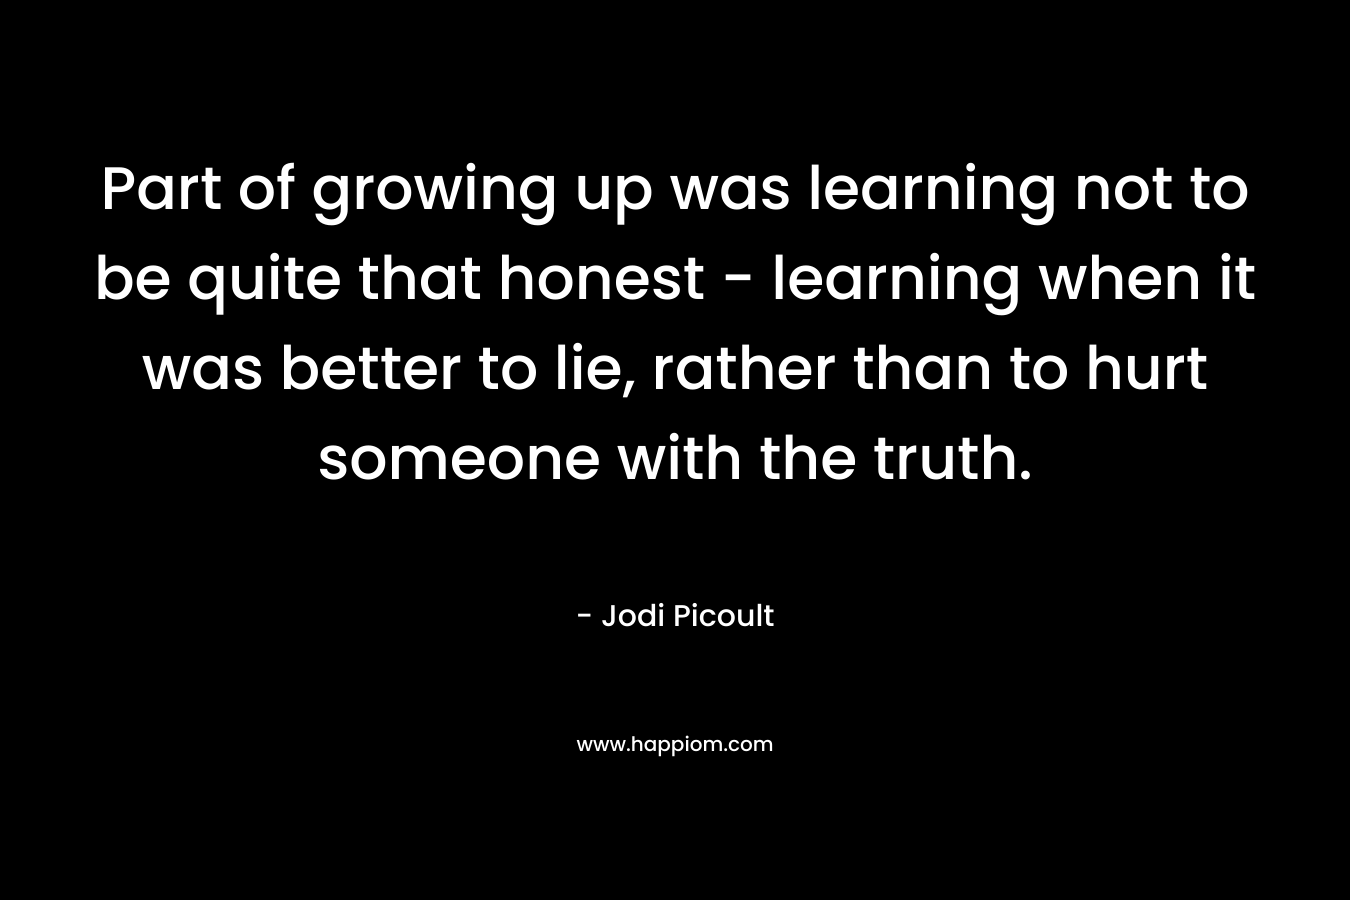 Part of growing up was learning not to be quite that honest - learning when it was better to lie, rather than to hurt someone with the truth.